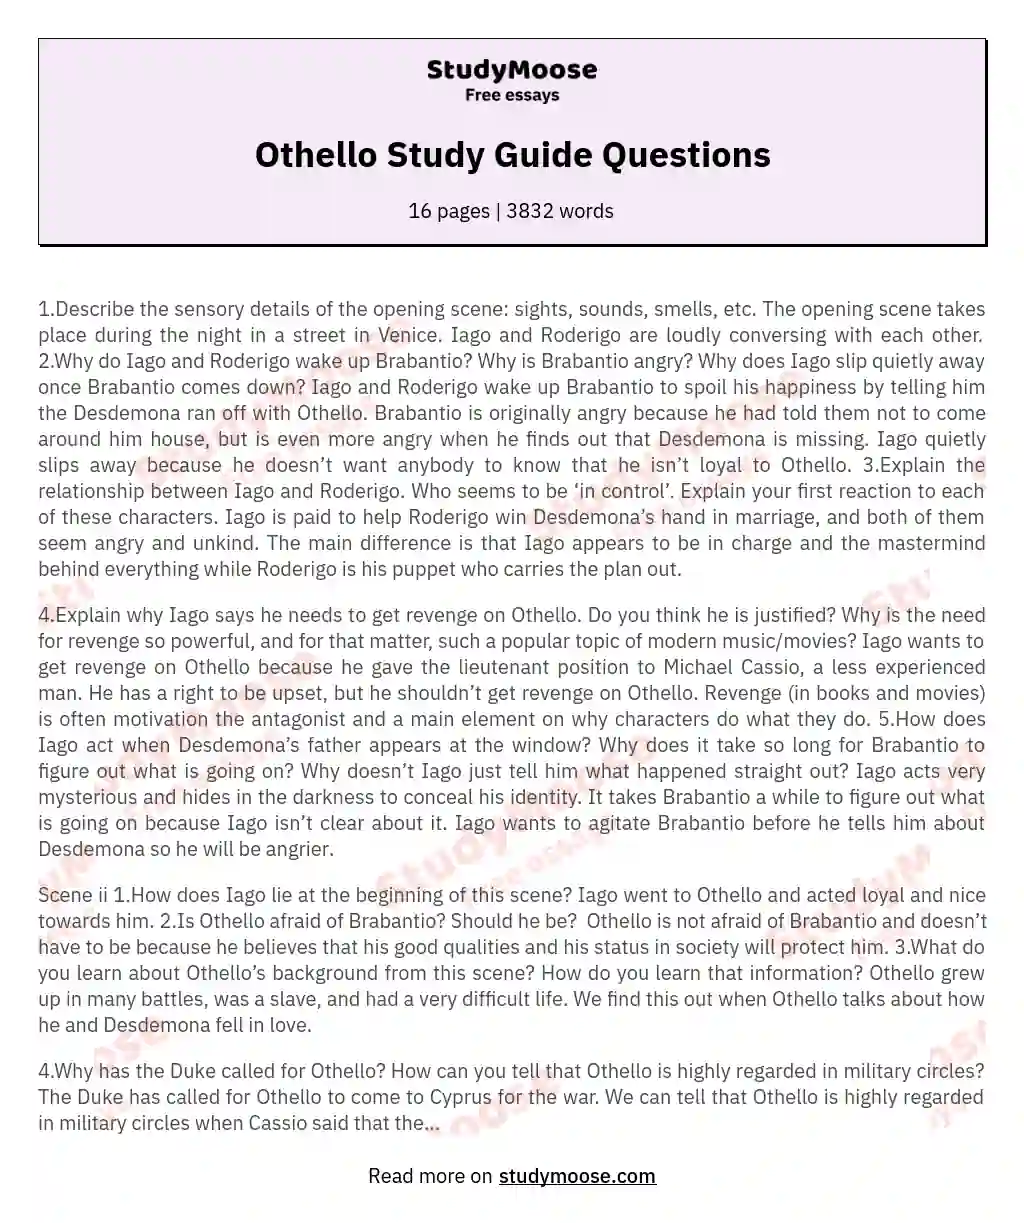 Othello Study Guide Questions essay